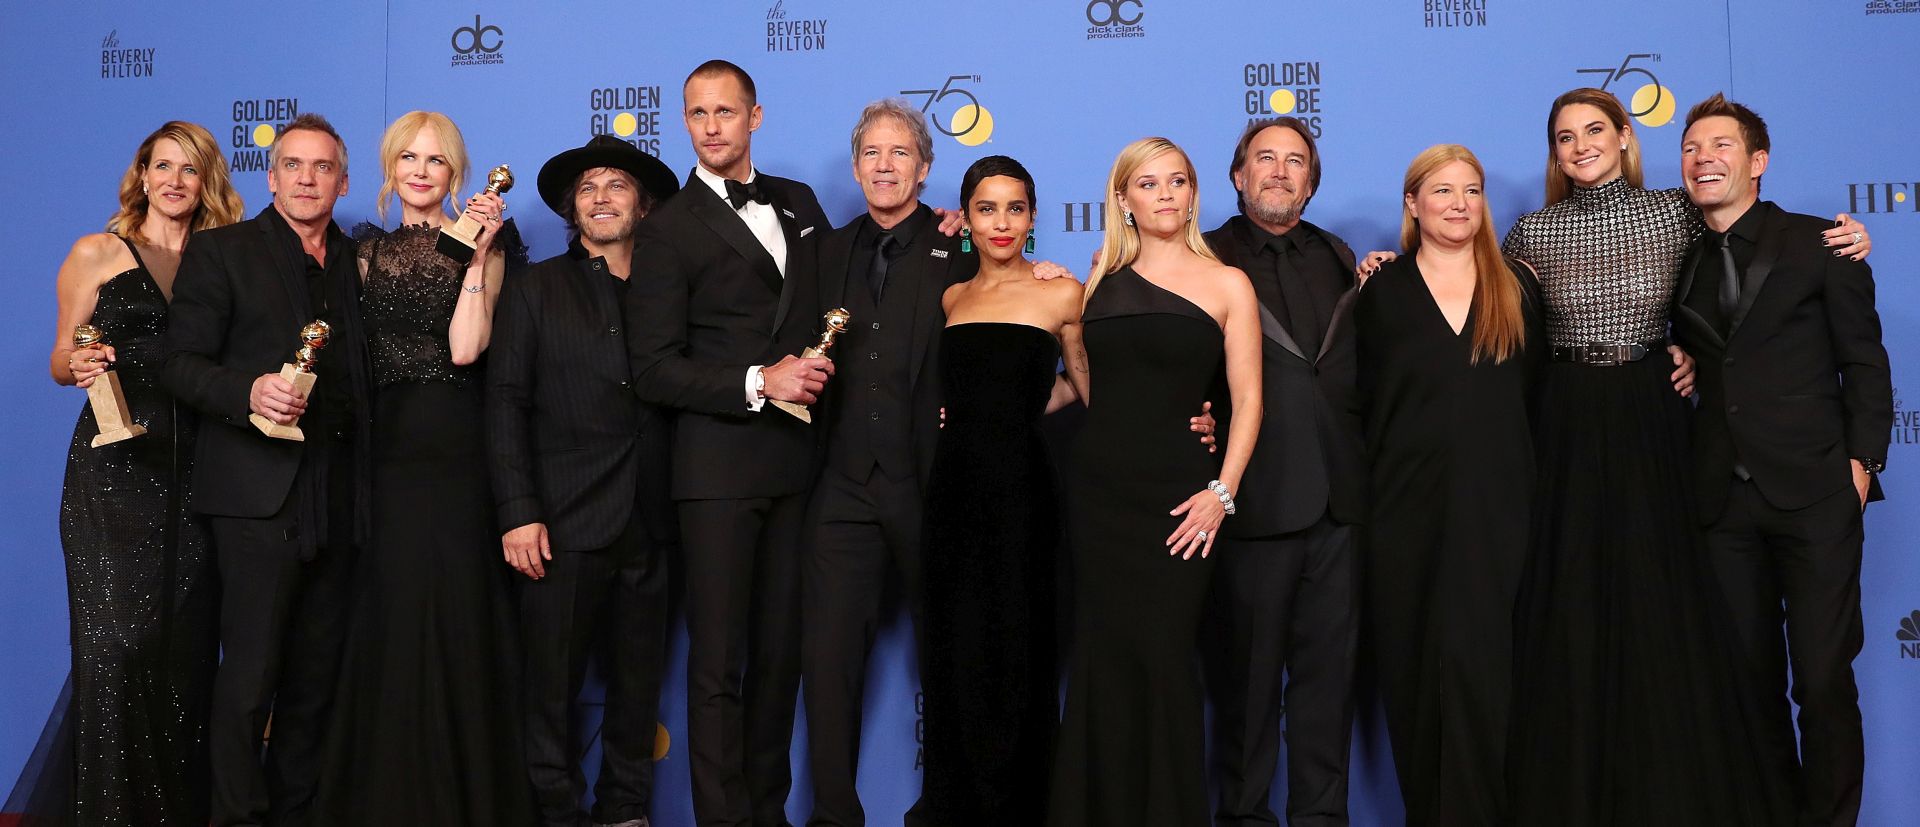 epa06424387 The cast and producers of 'Big Little Lies' pose with the award for Limited Series or Motion Picture Made for Television in the press room during the 75th annual Golden Globe Awards ceremony at the Beverly Hilton Hotel in Beverly Hills, California, USA, 07 January 2018.  EPA/MIKE NELSON